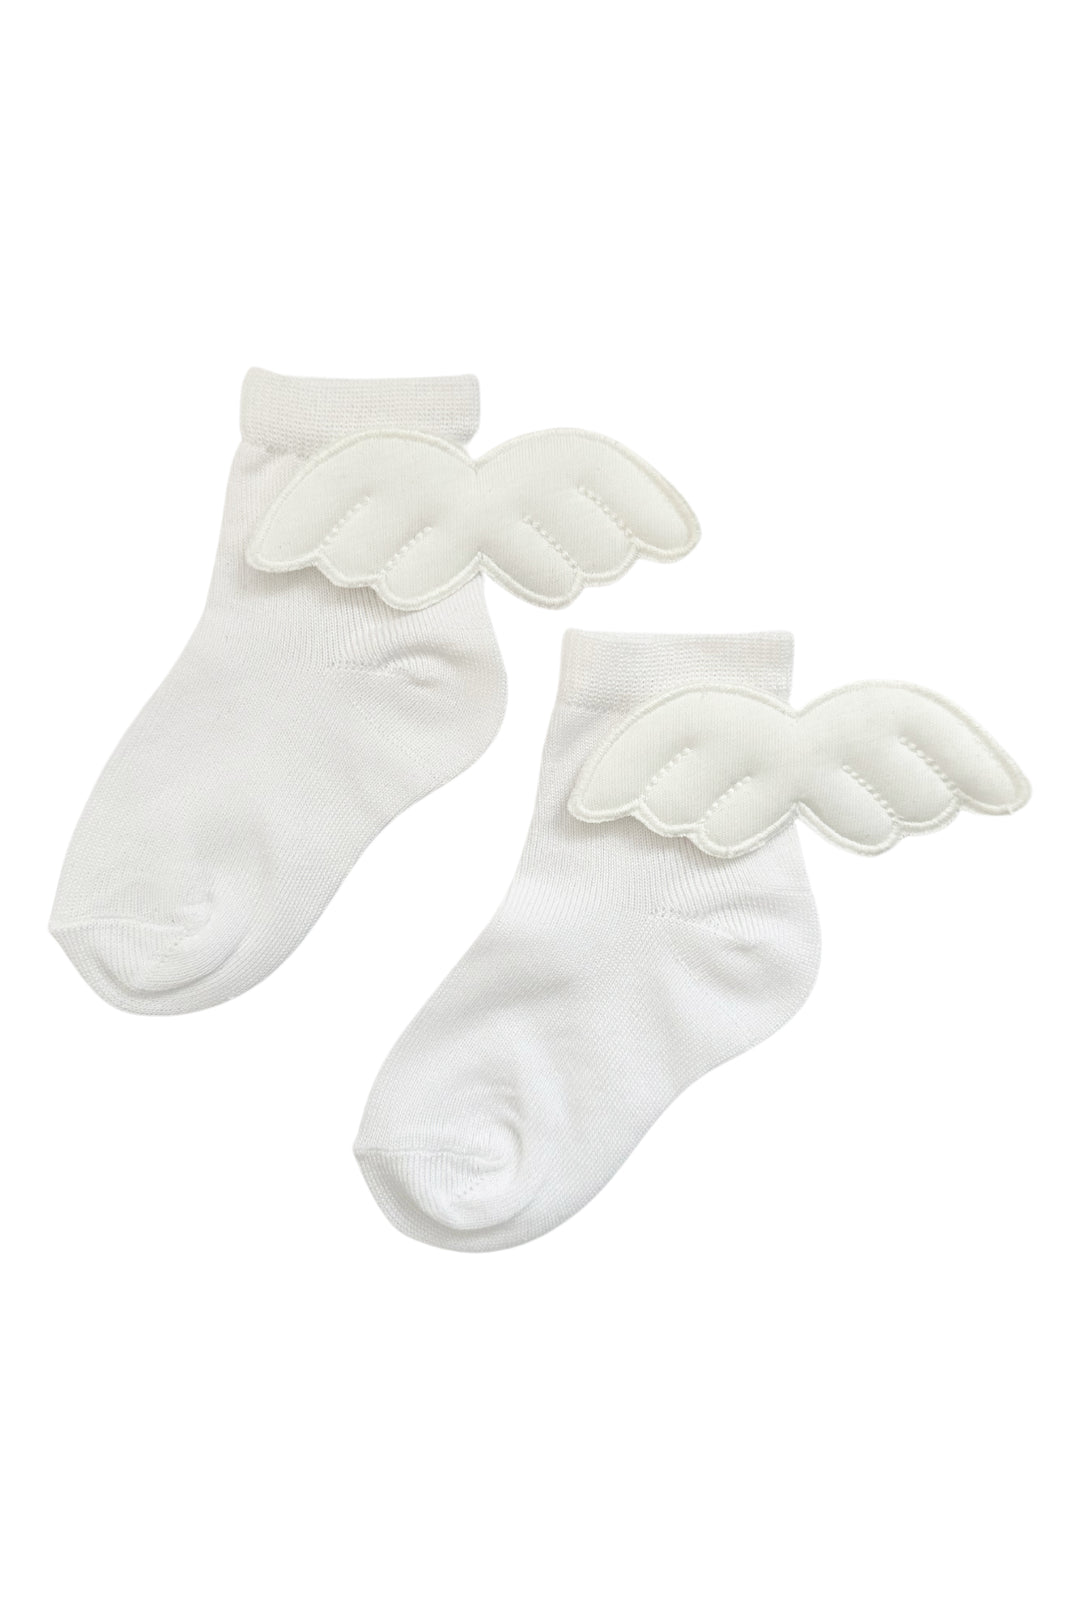 Meia Pata White Angel Wing Ankle Socks | Millie and John